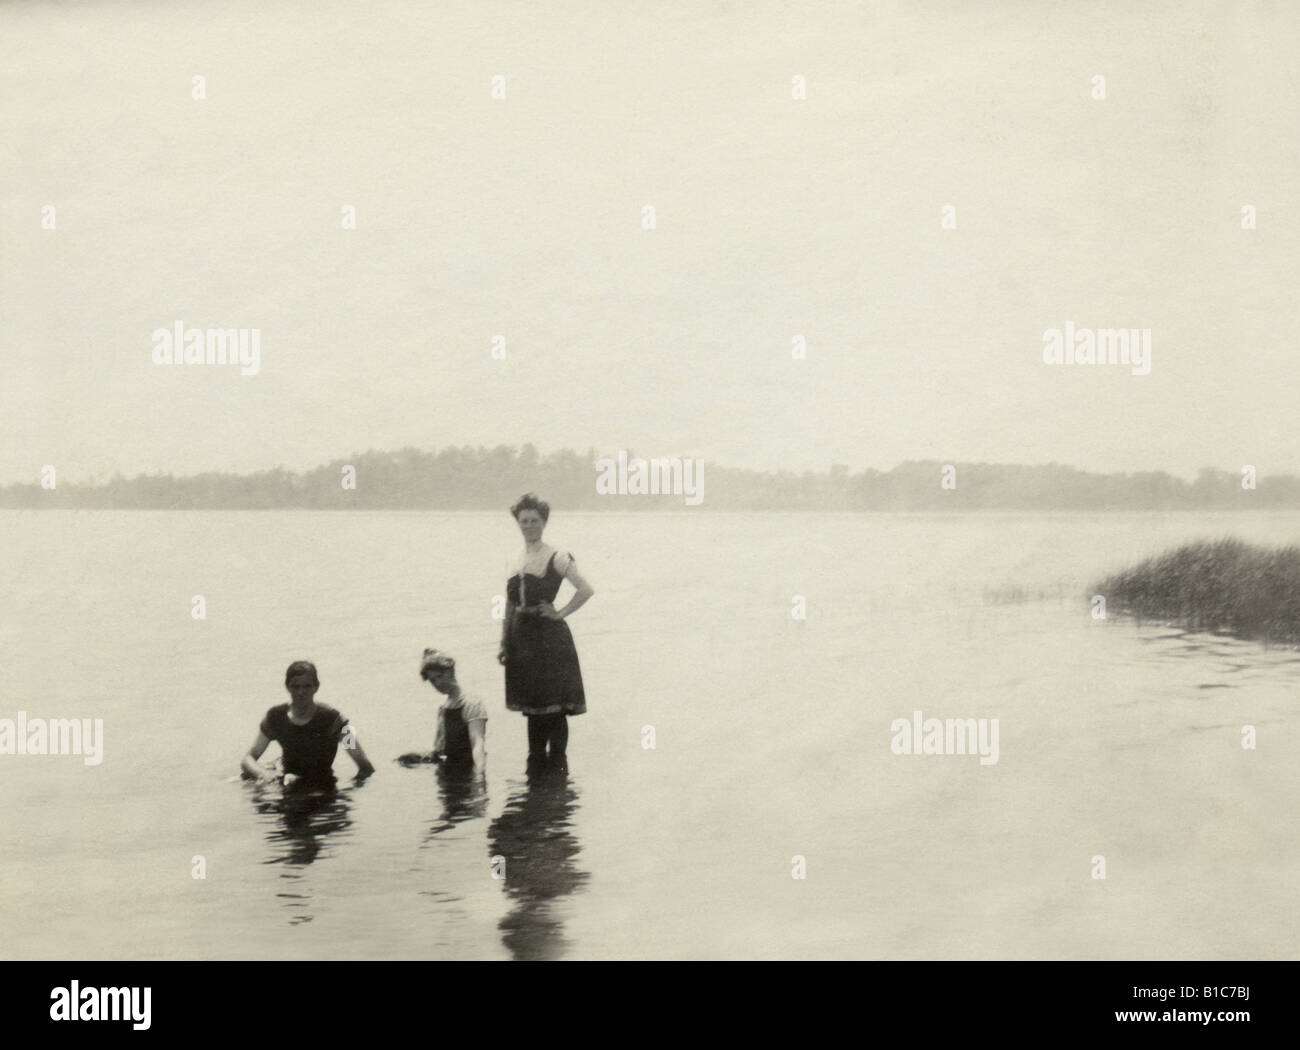 Antique photograph, circa 1890s, of two women and 1 man dressed in Victorian-era bathing suits swimming in a New England lake. Stock Photo